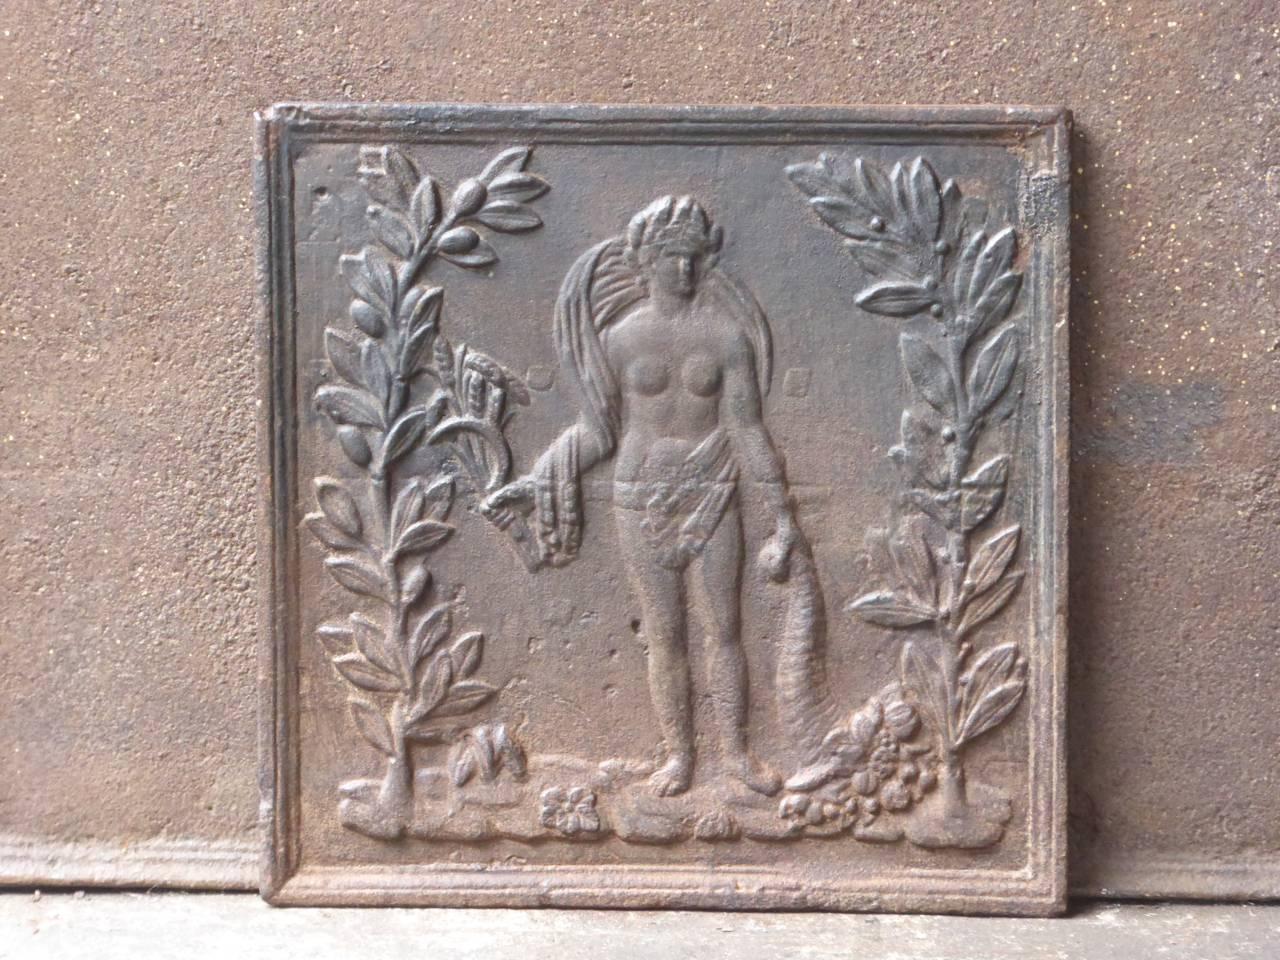 19th century French fireback with the goddess Ceres. Goddess of agriculture (particularly grain) and the maternal love.

We have a unique and specialized collection of antique and used fireplace accessories consisting of more than 1000 listings at